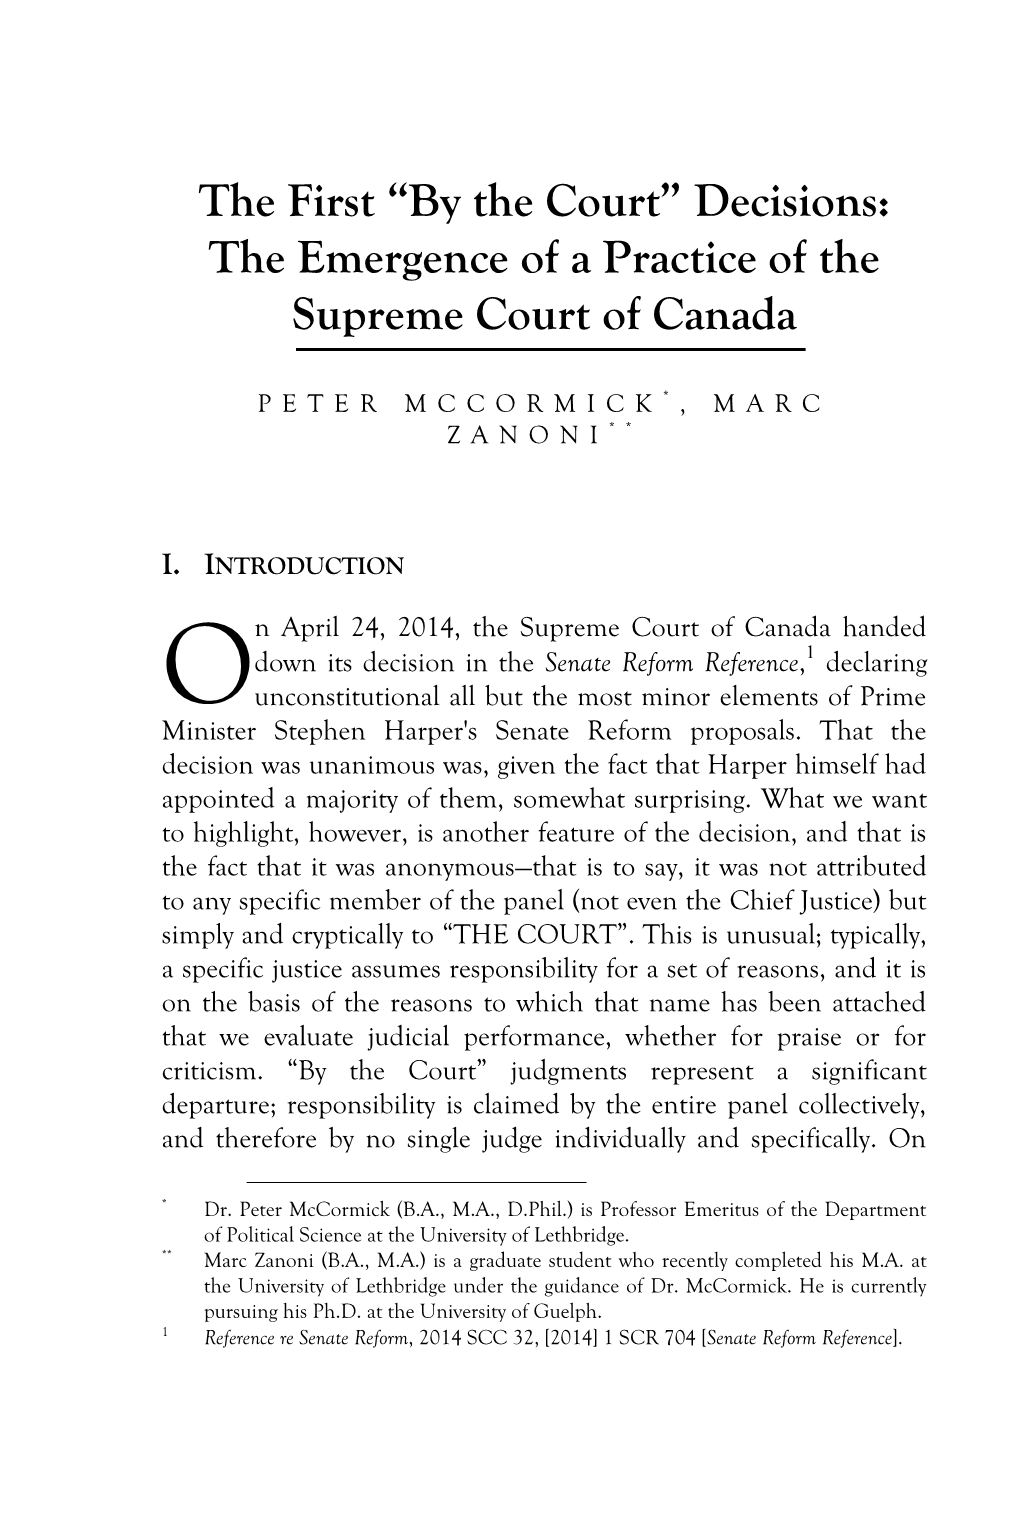 “By the Court” Decisions: the Emergence of a Practice of the Supreme Court of Canada